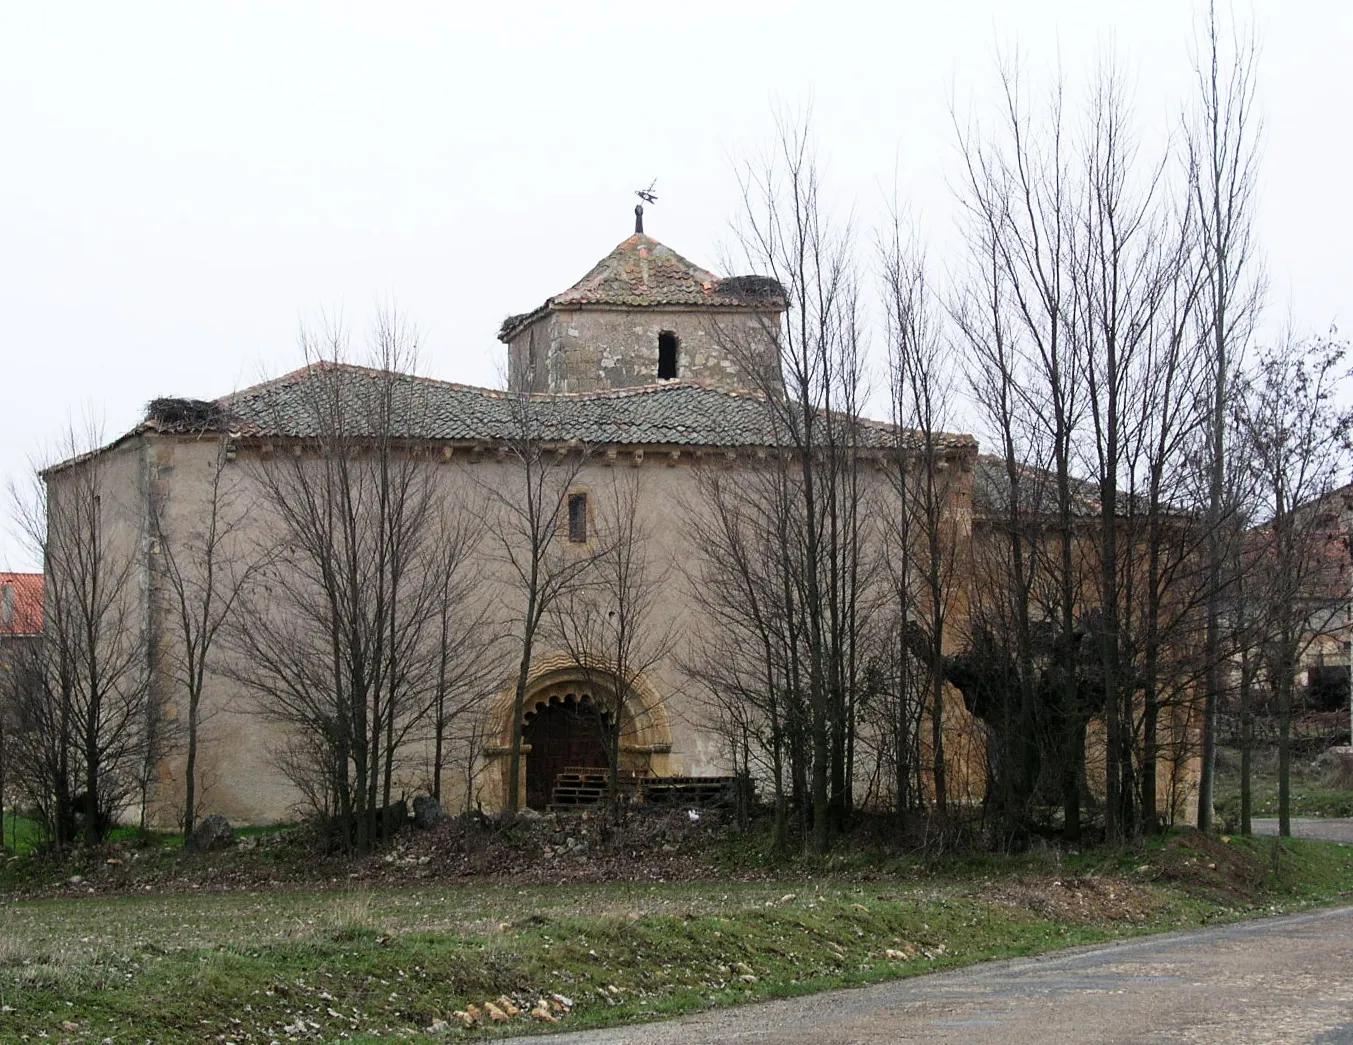 Photo showing: Iglesia in the small village of Sotillo, near Sepúlveda, Spain.

The picture was taken the 28th December 2003 by Håkan Svensson, (Xauxa).